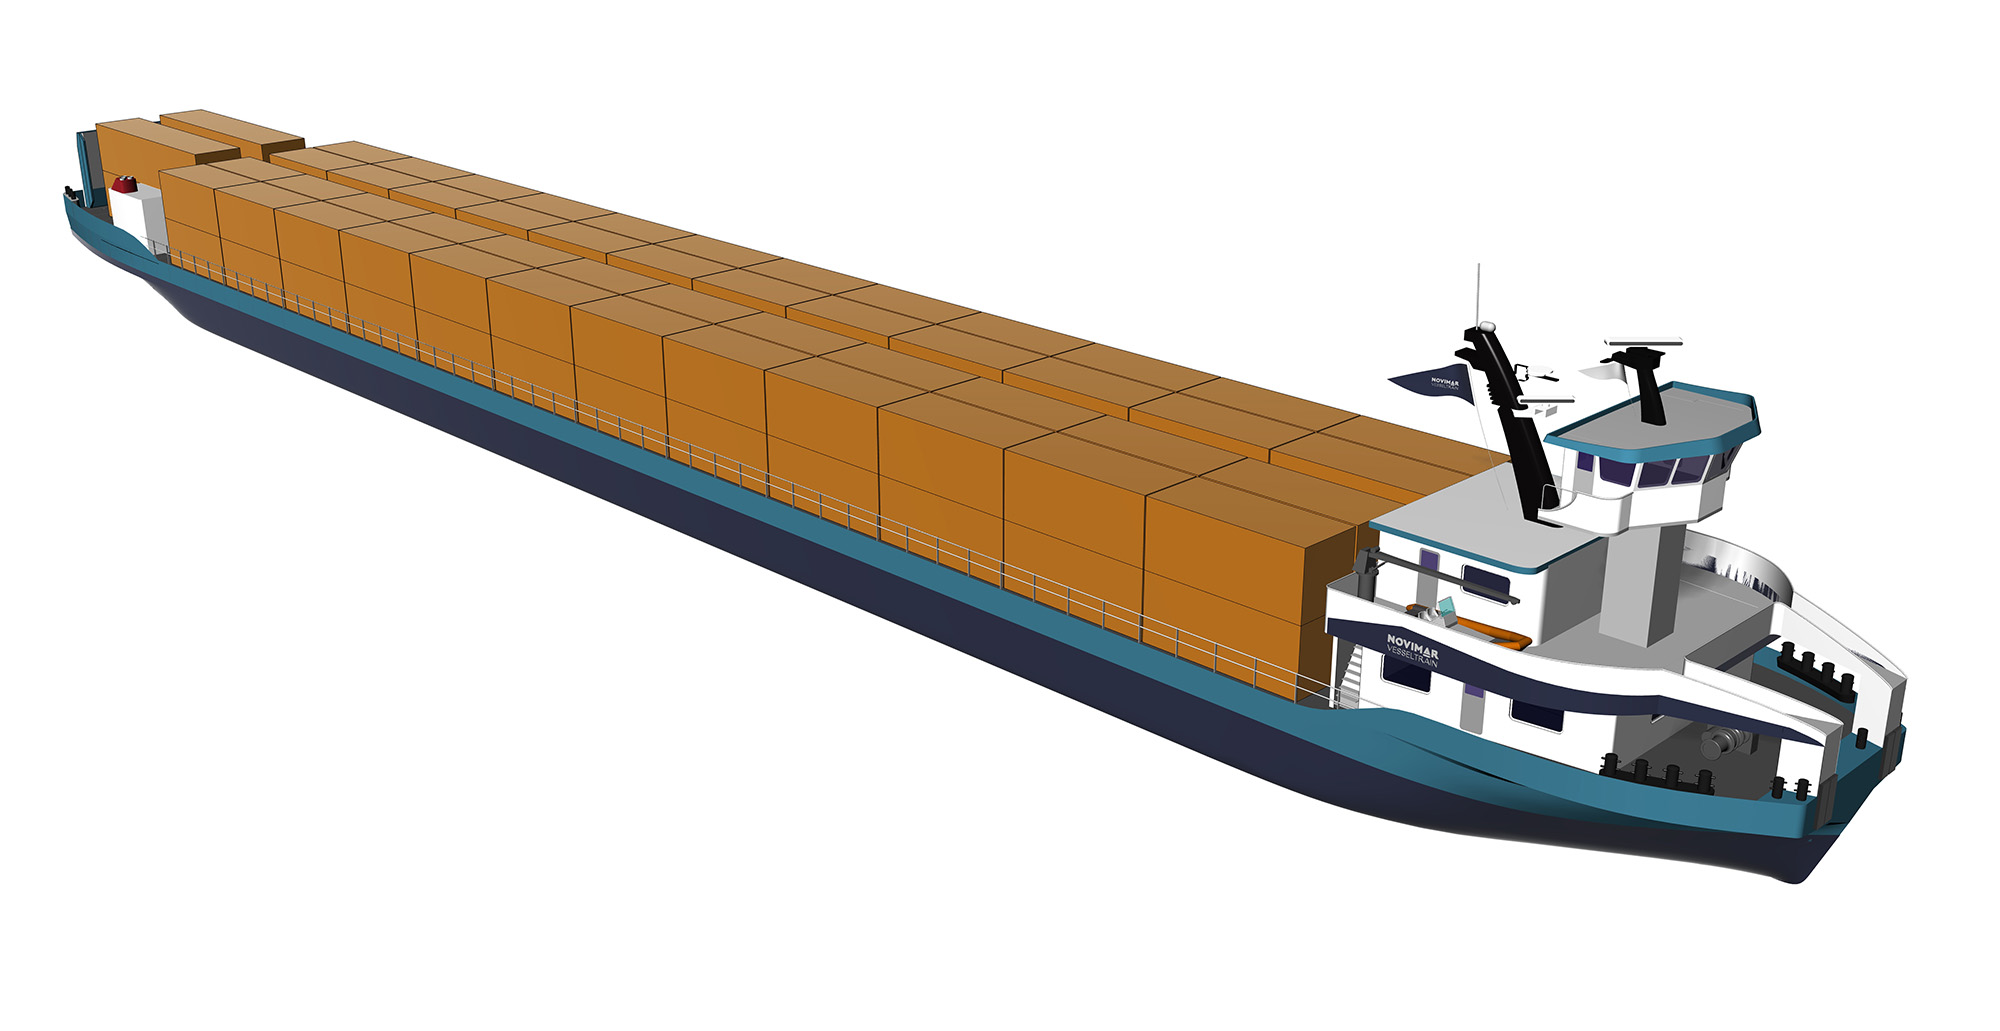 Shallow draught vessel for waterborne platooning developed in the project NOVIMAR